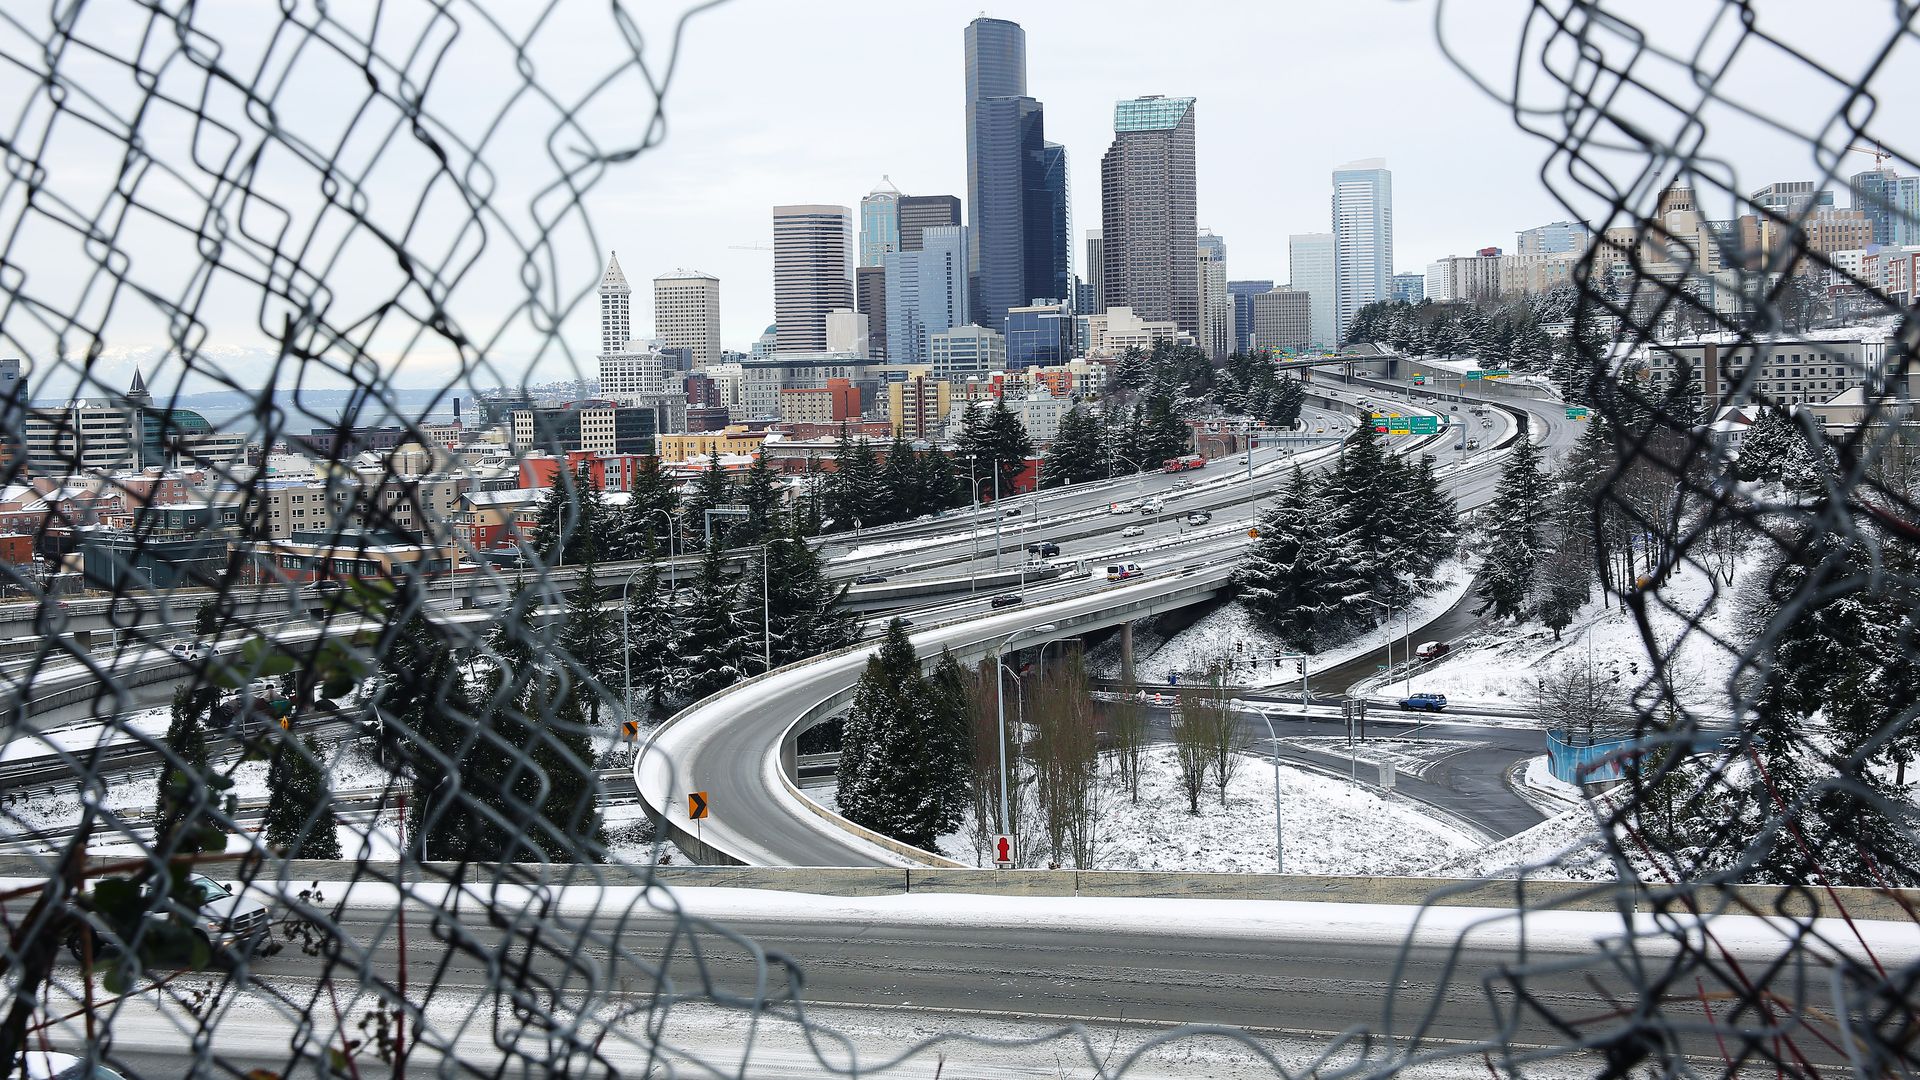 Light snow covers Seattle as seen through a chainlink fence